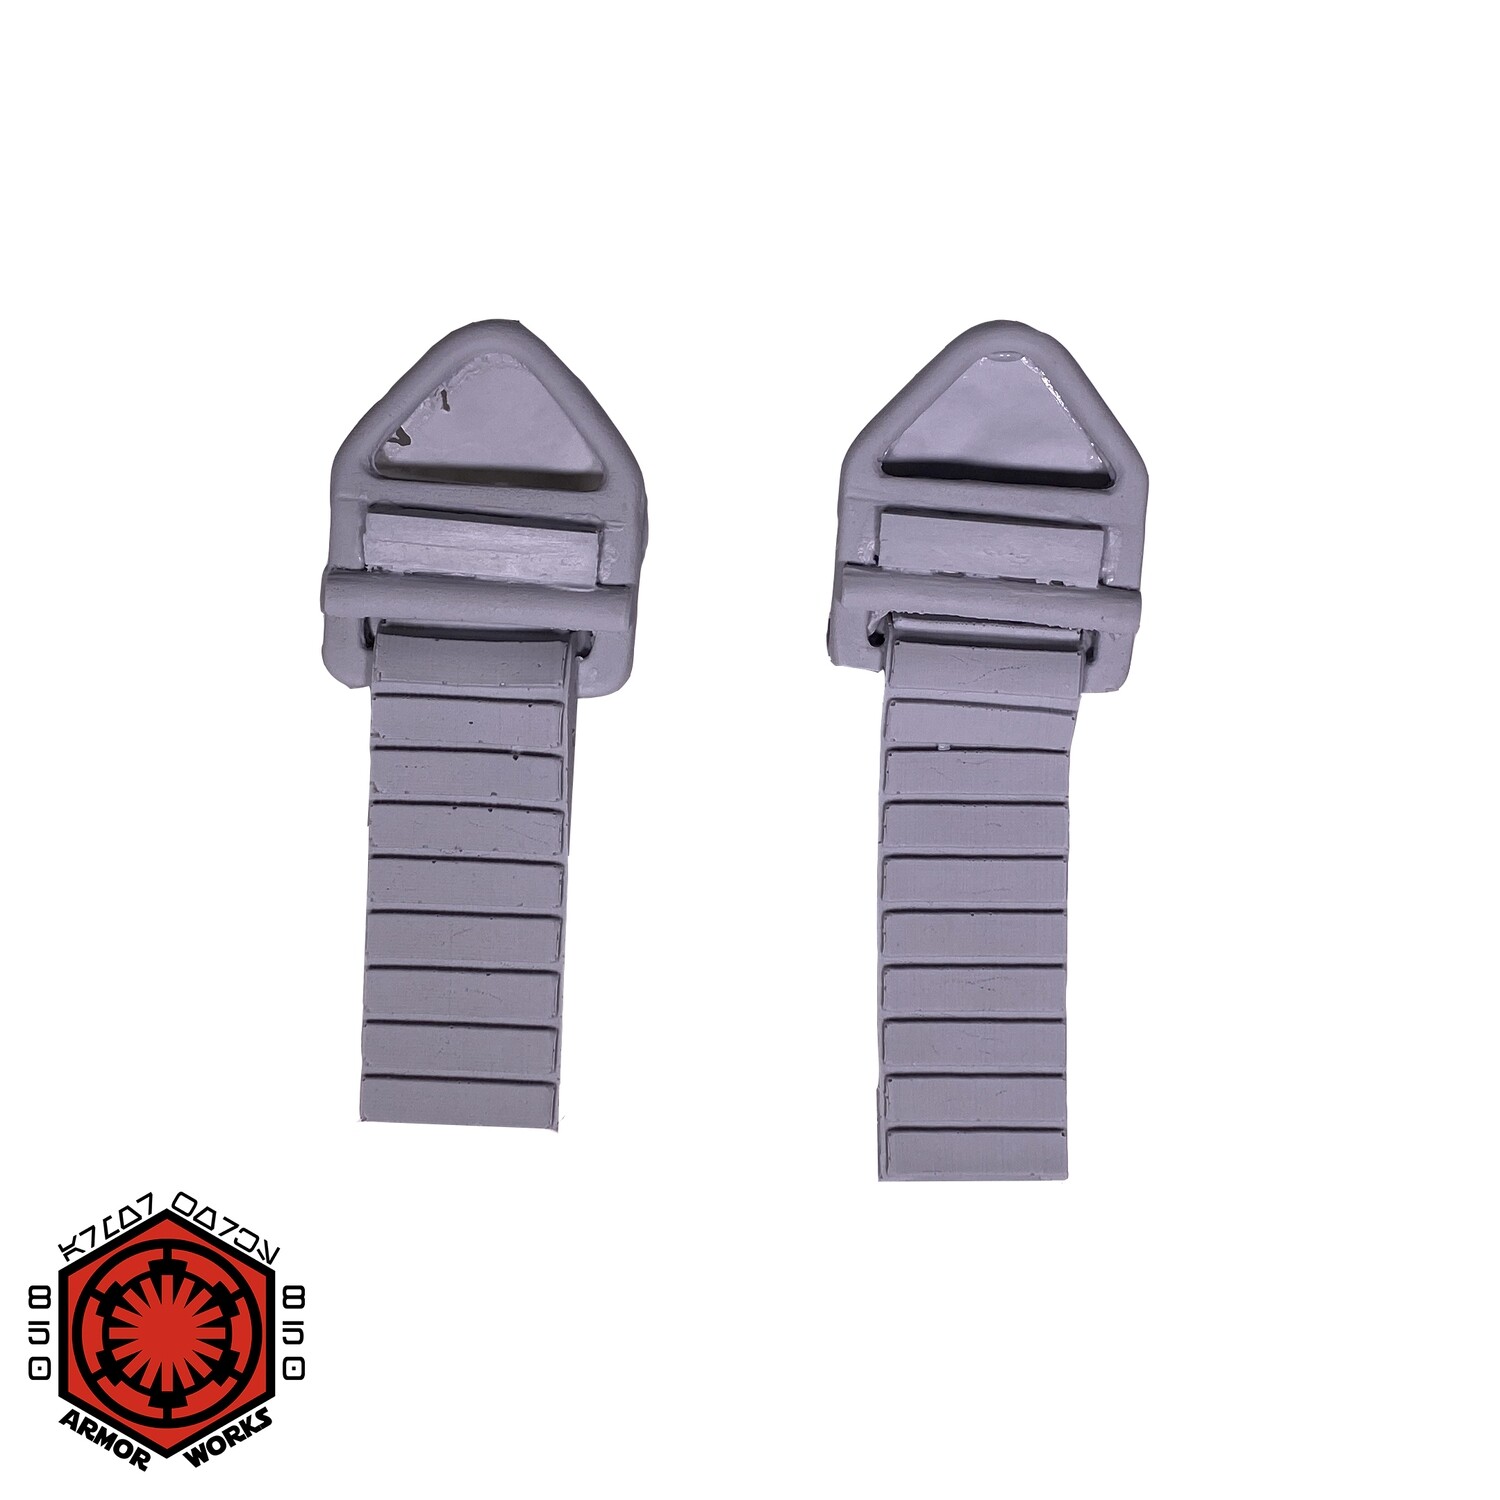 Death Trooper Chest Side Buckles